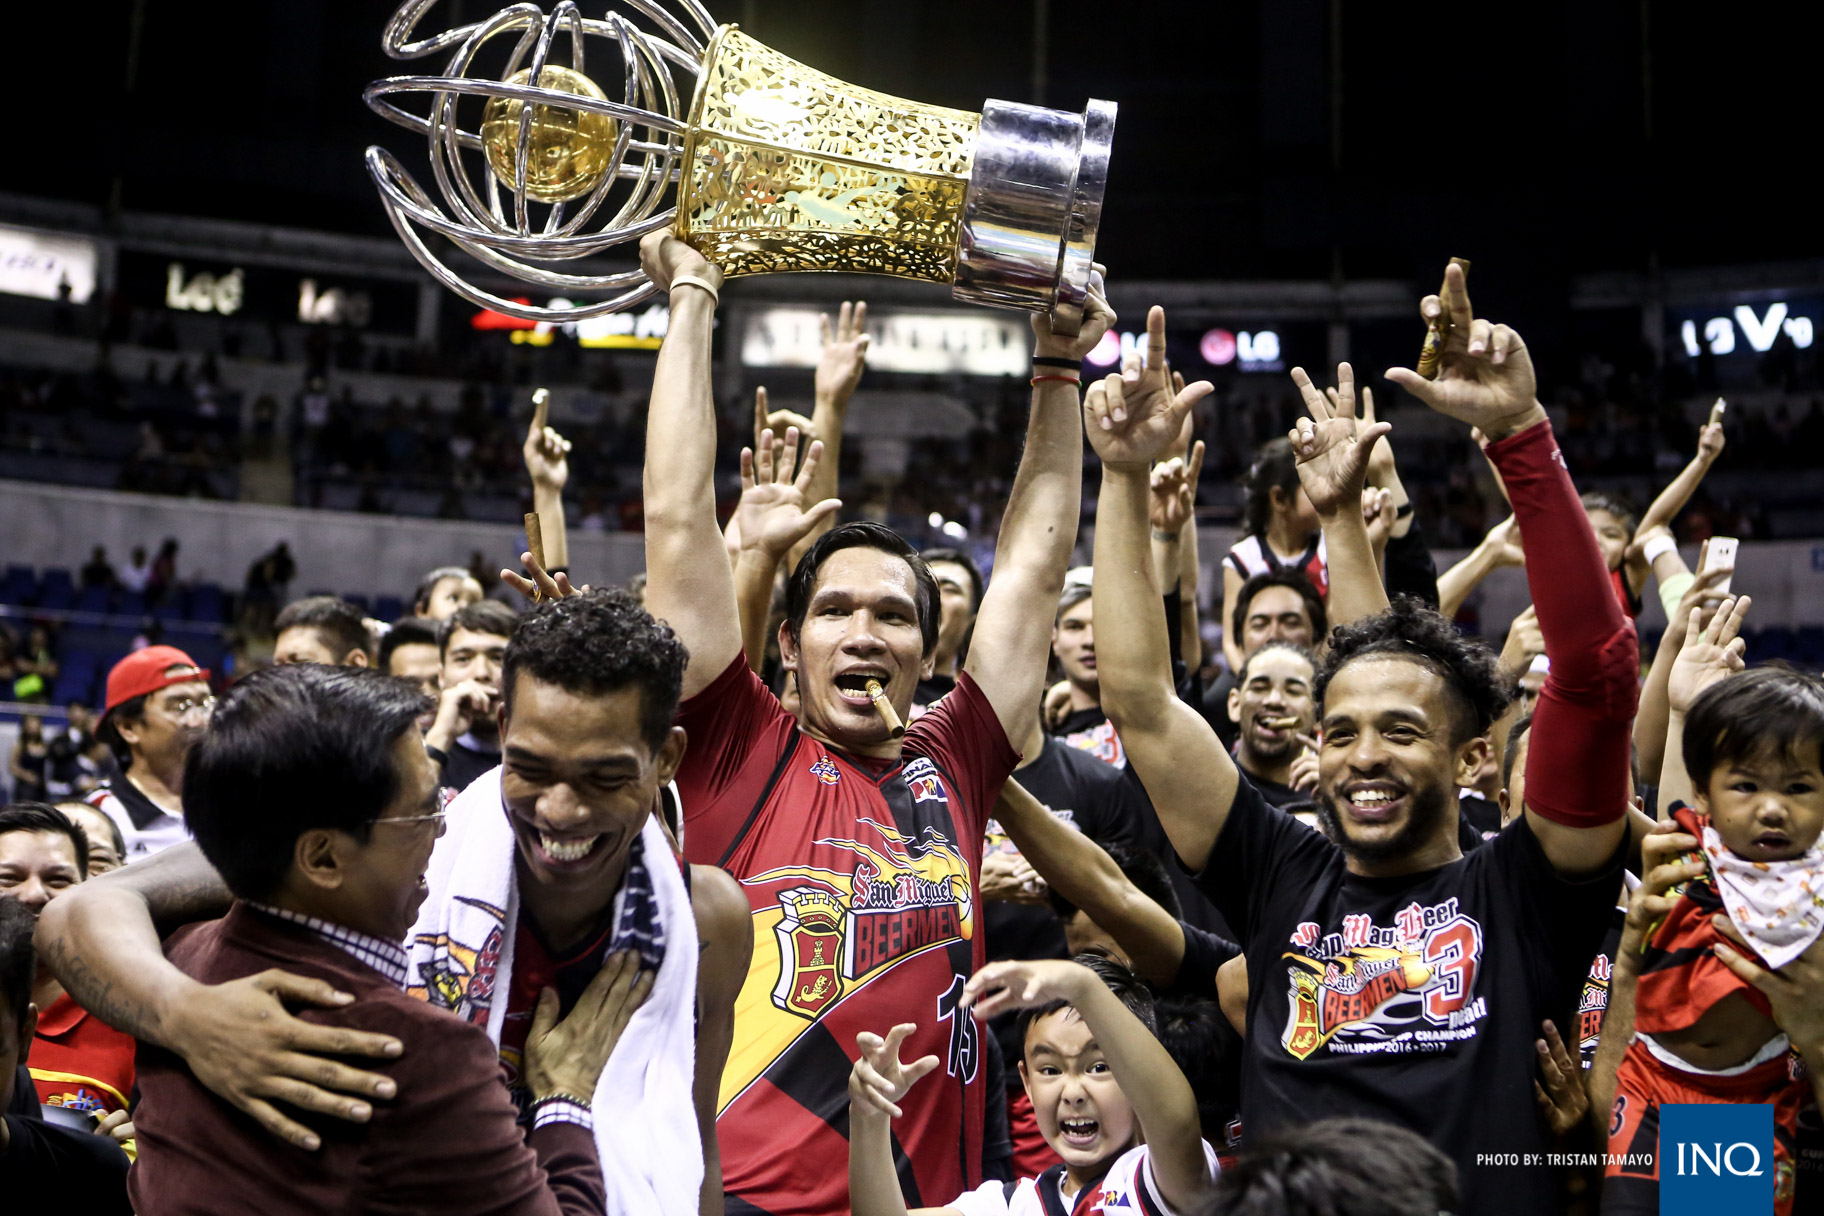 Fajardo lifts PBA Philippine Cup trophy as Beermen celebrate another crown. Photo by Tristan Tamayo/INQUIRER.net